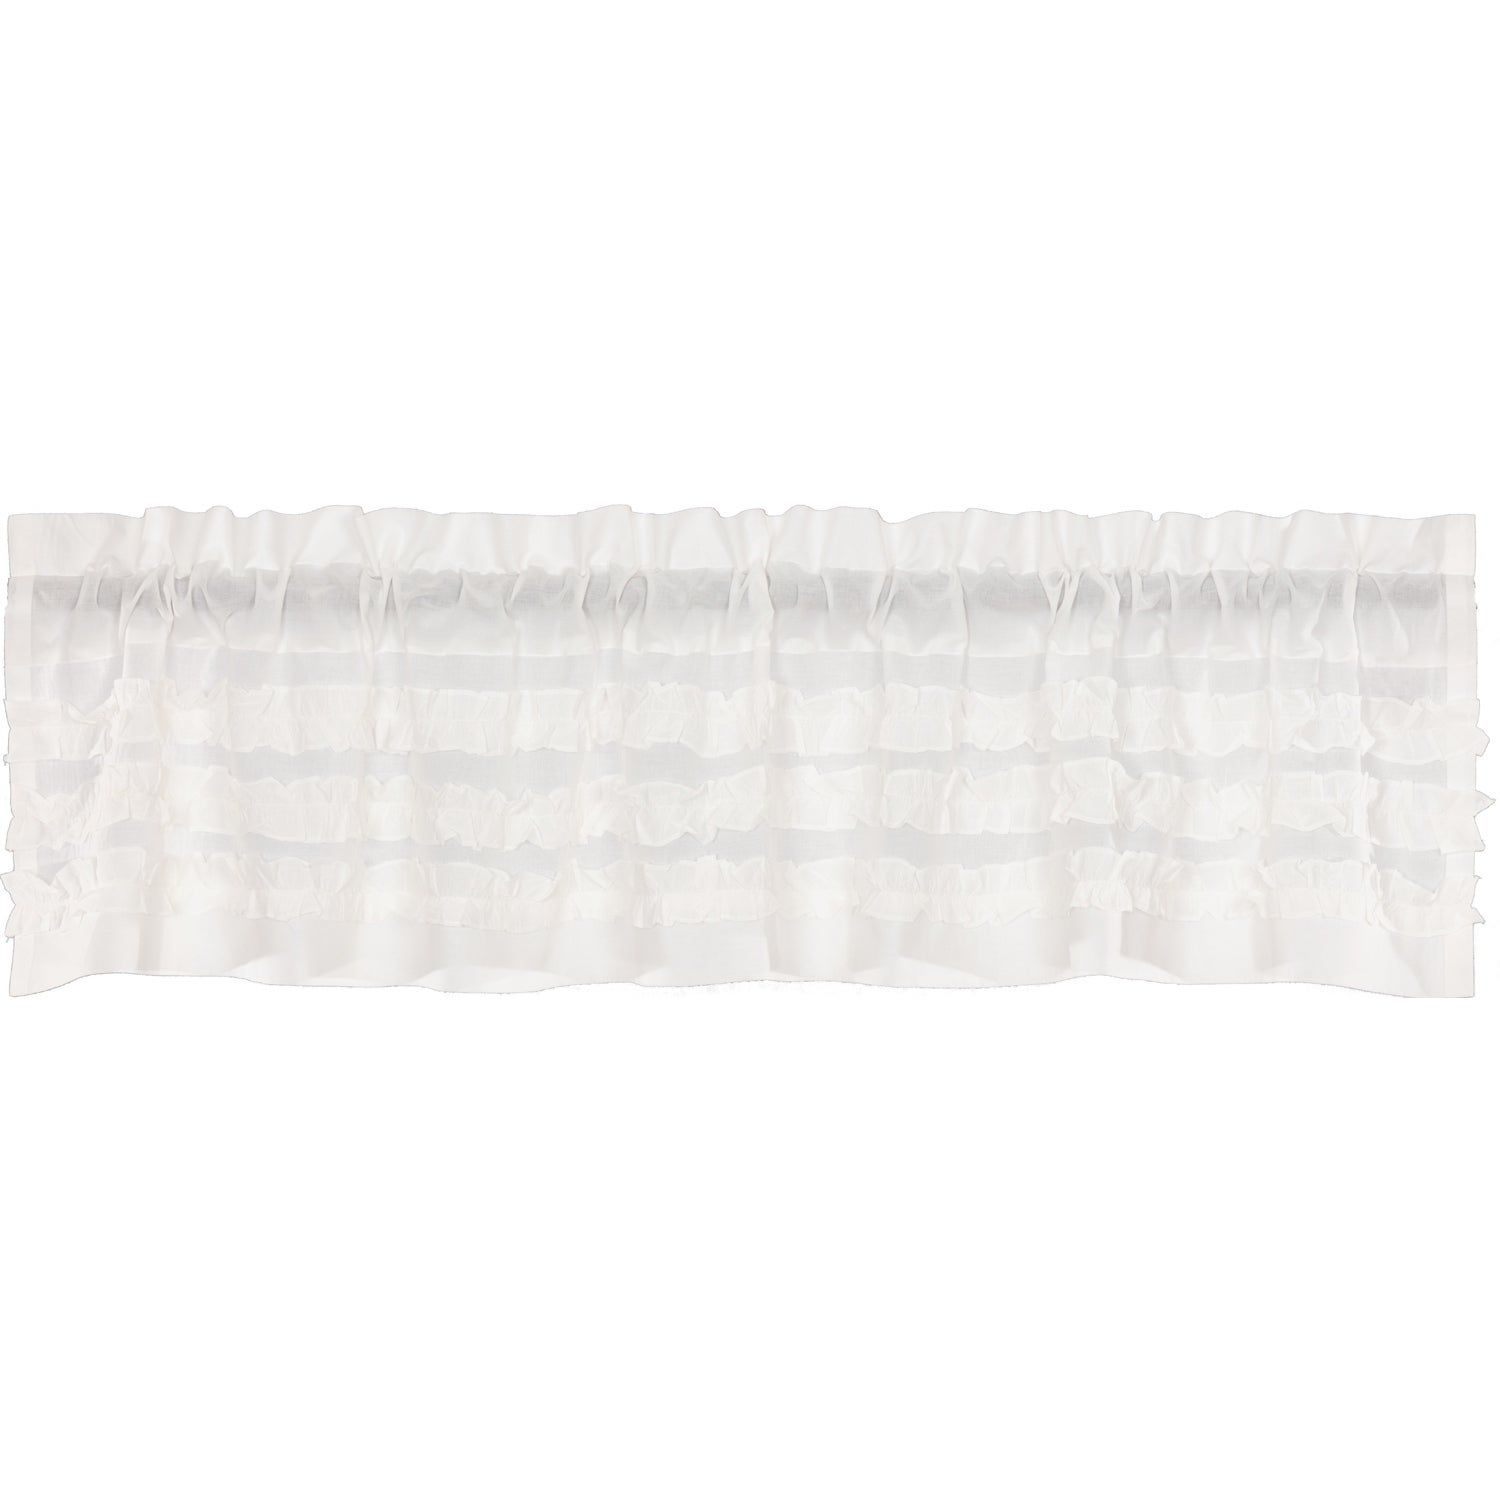 White Farmhouse Kitchen Curtains Vhc White Ruffled Sheer Petticoat Valance  Rod Pocket Cotton Solid Color Ruched Ruffle Regarding Rod Pocket Cotton Solid Color Ruched Ruffle Kitchen Curtains (Photo 1 of 20)